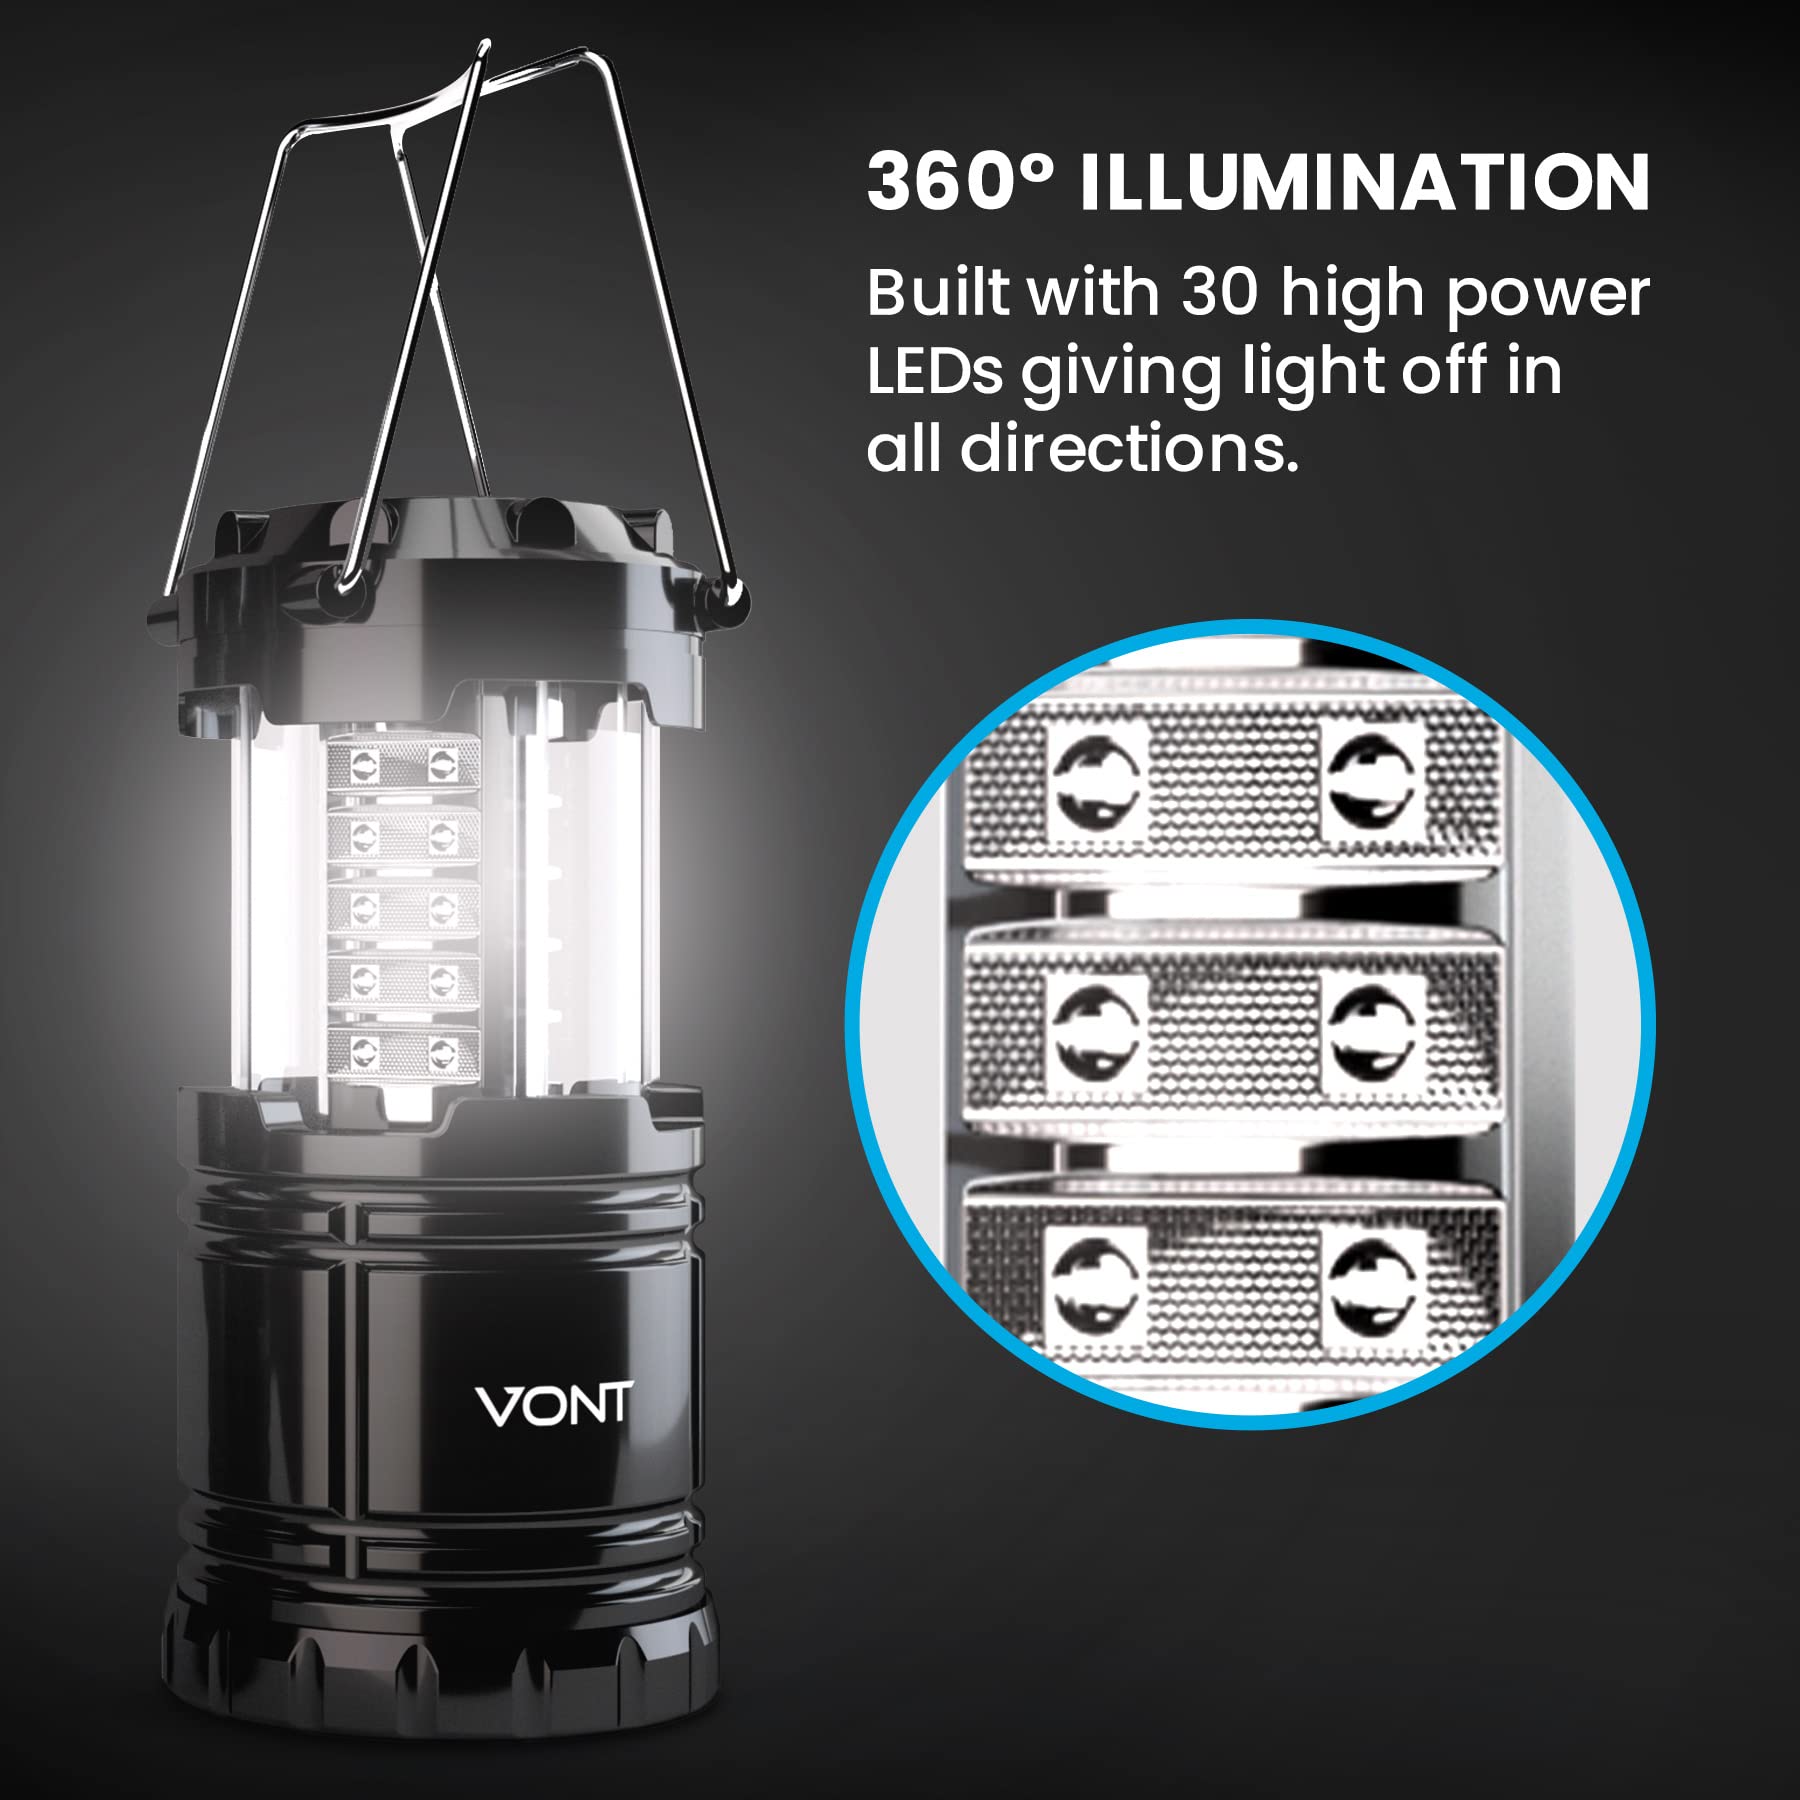 Vont LED Camping Lantern, LED Lanterns, Suitable Survival Kits for Hurricane, Emergency Light for Storm, Outages, Outdoor Portable Lanterns, Black, Collapsible, (Batteries Included)